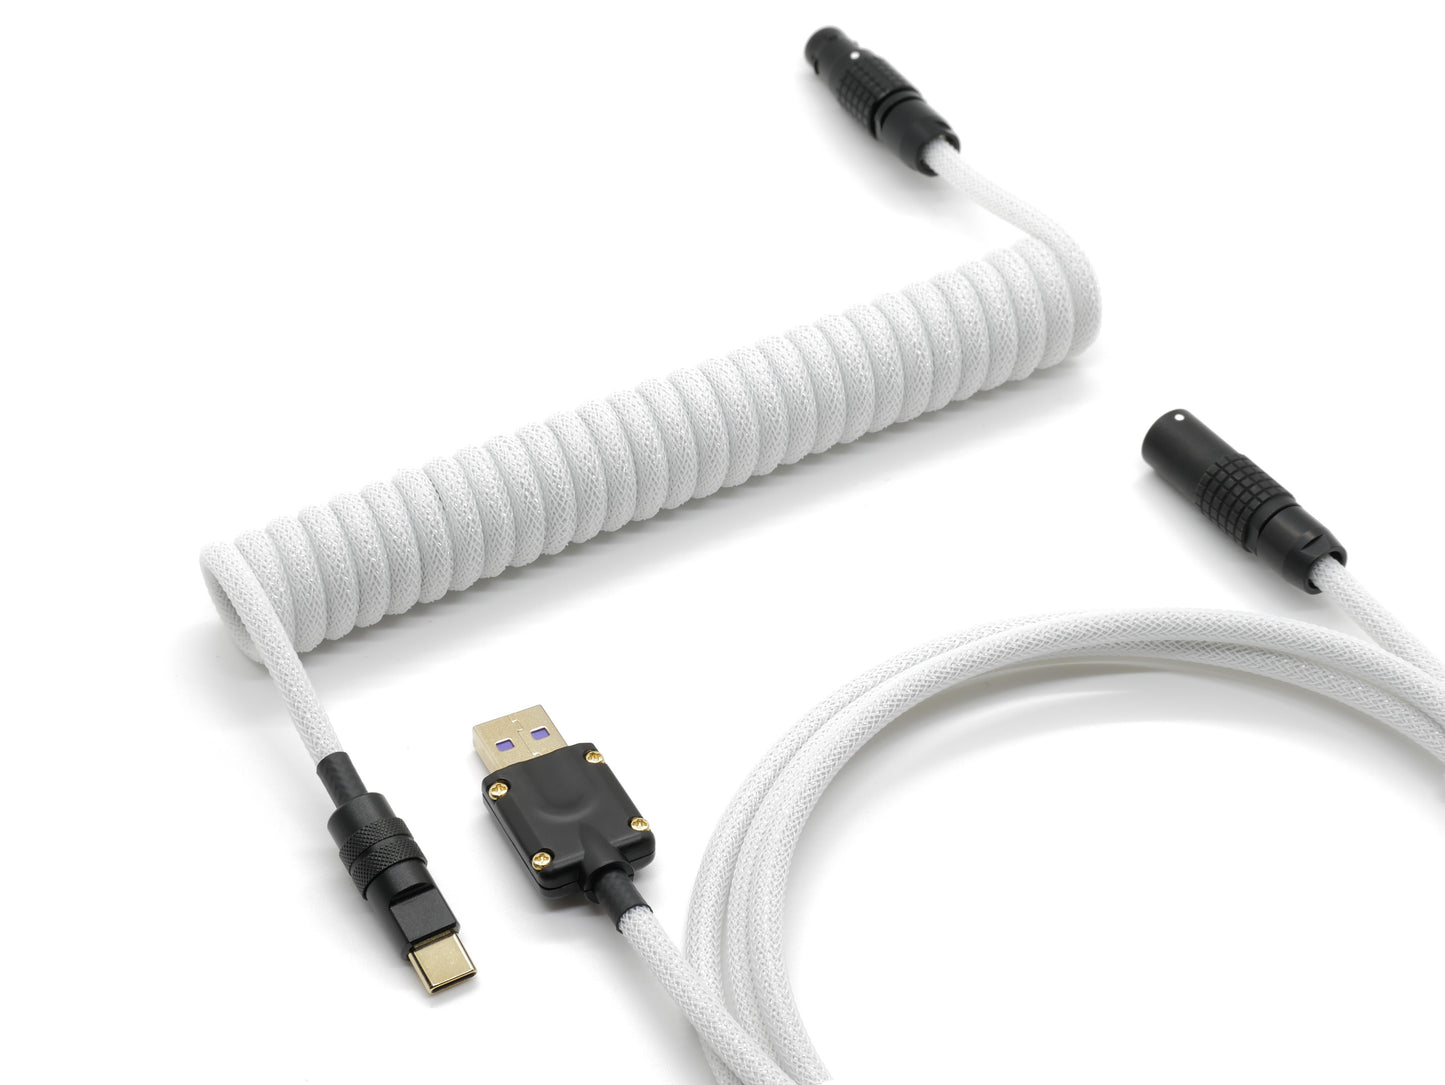 White and Black Lemo Style Cable